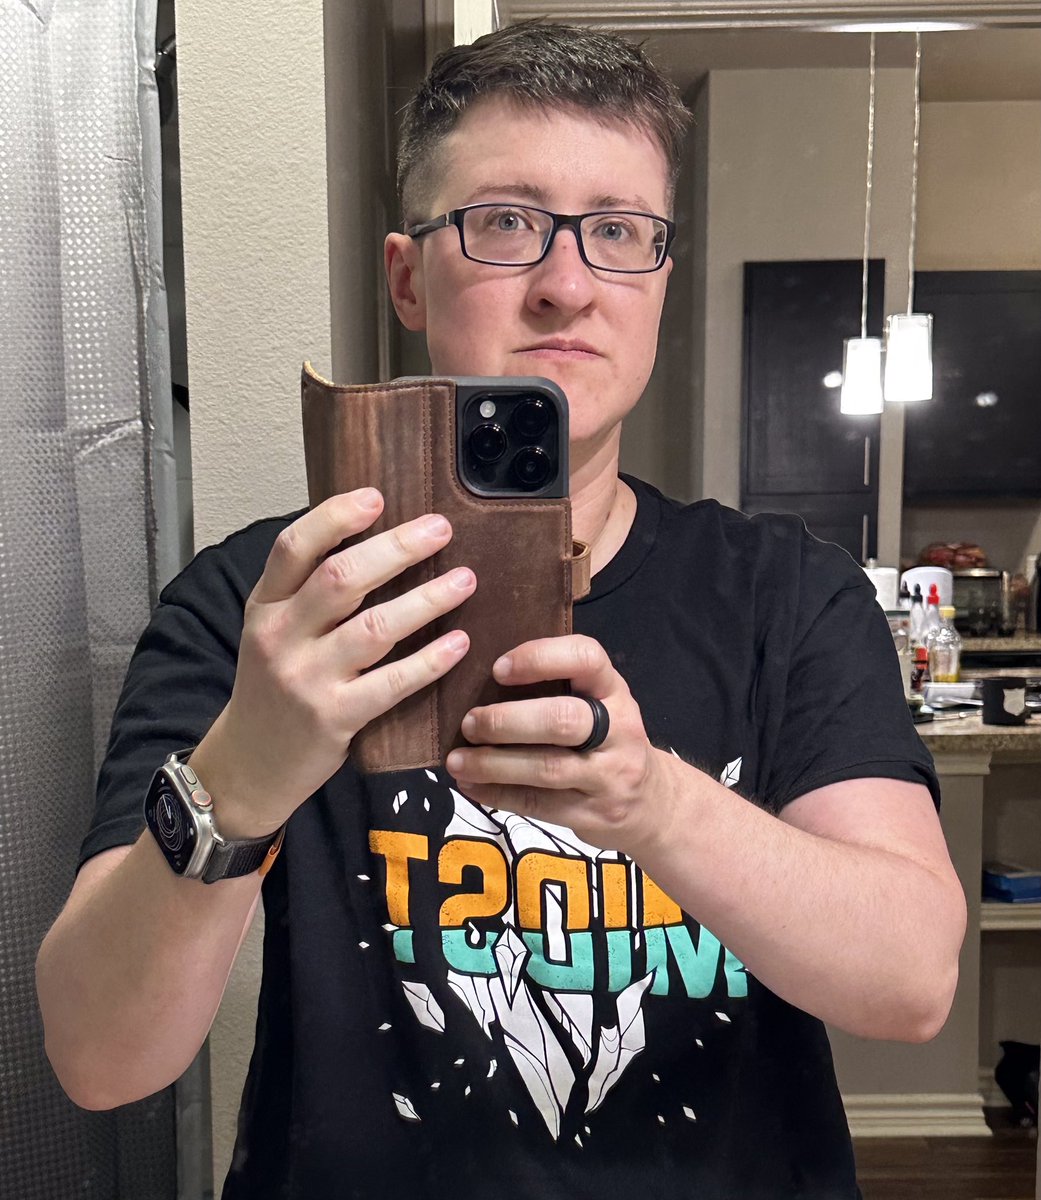 Two years on T. I’ve gained weight. My shoulders are broader. I now need to shave my face every other day. Despite the country and all its new laws and policies, I have no regrets. I am who I’ve always been: CPT(P) Riordan Ledgerwood, MD.